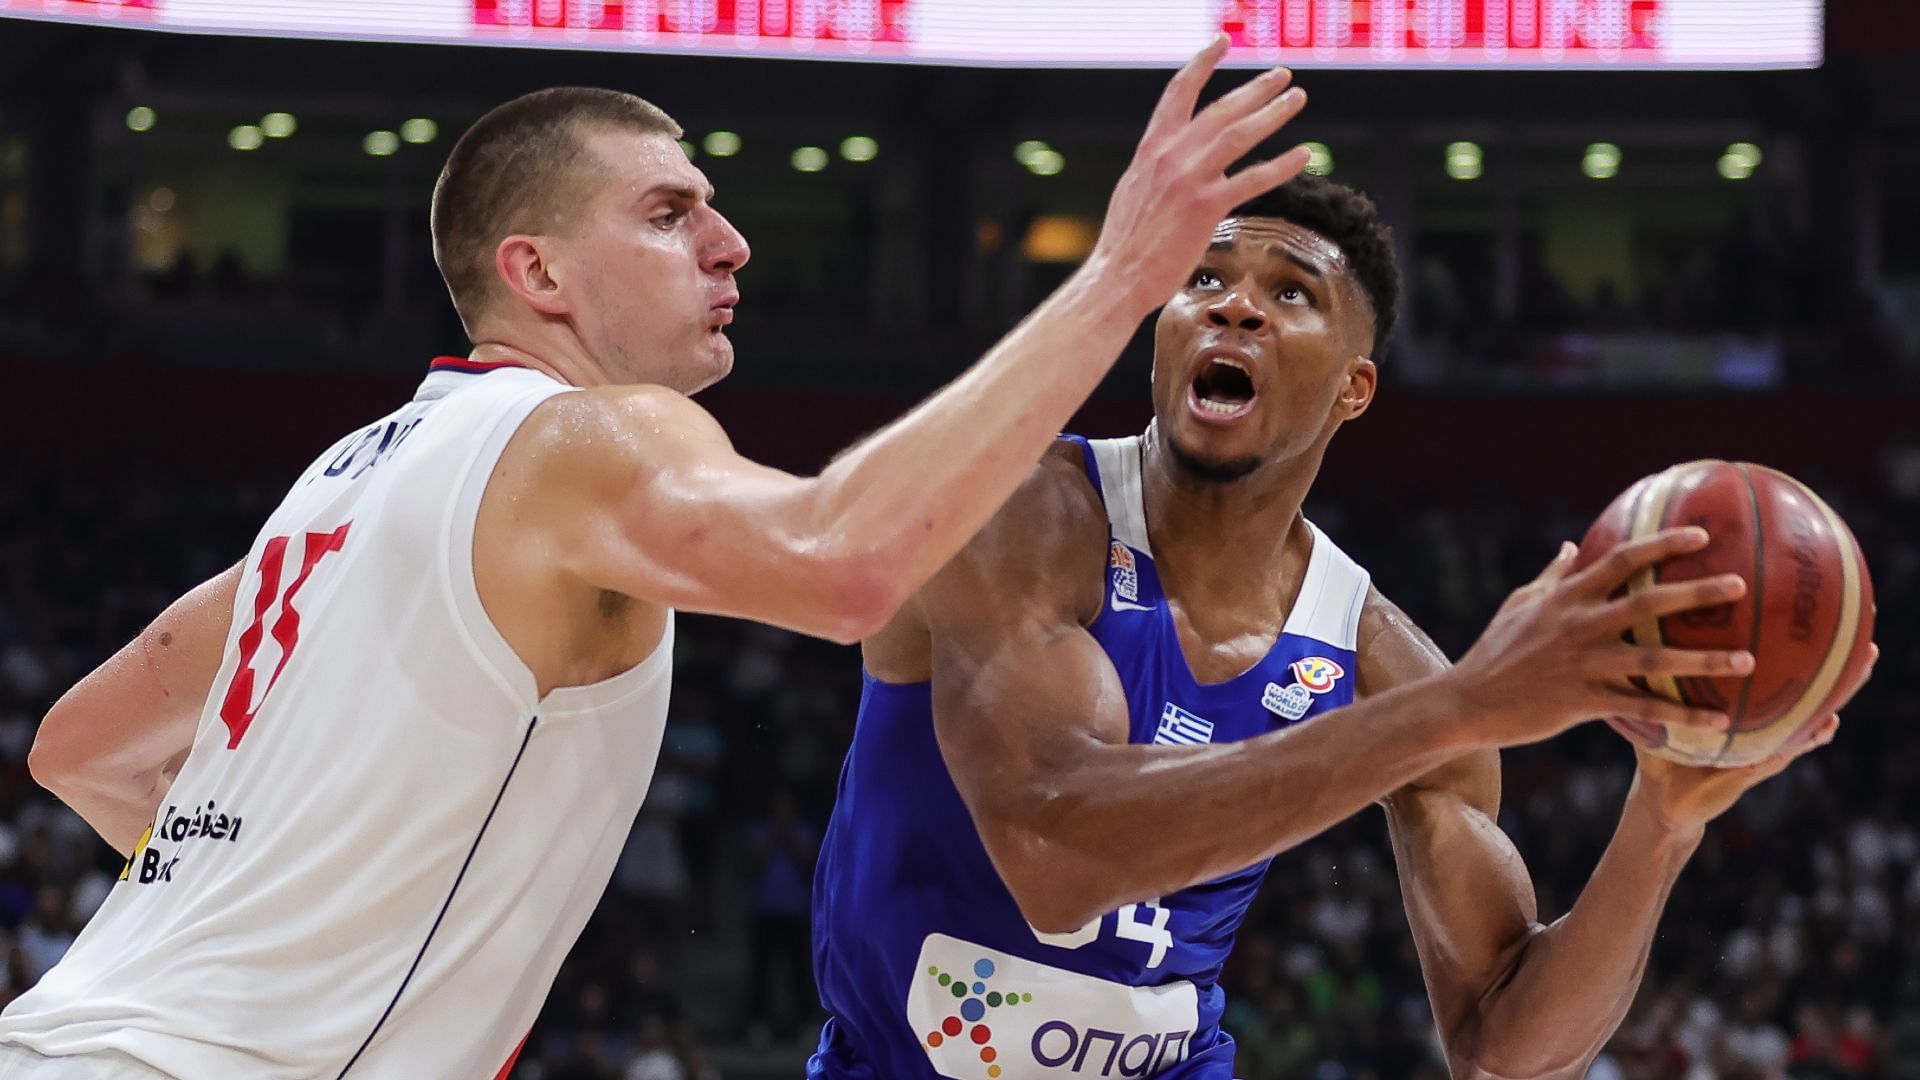 Nikola Jokic and Giannis Antetokounmpo in action during a World Cup qualifier game [Photo via NBA.com]